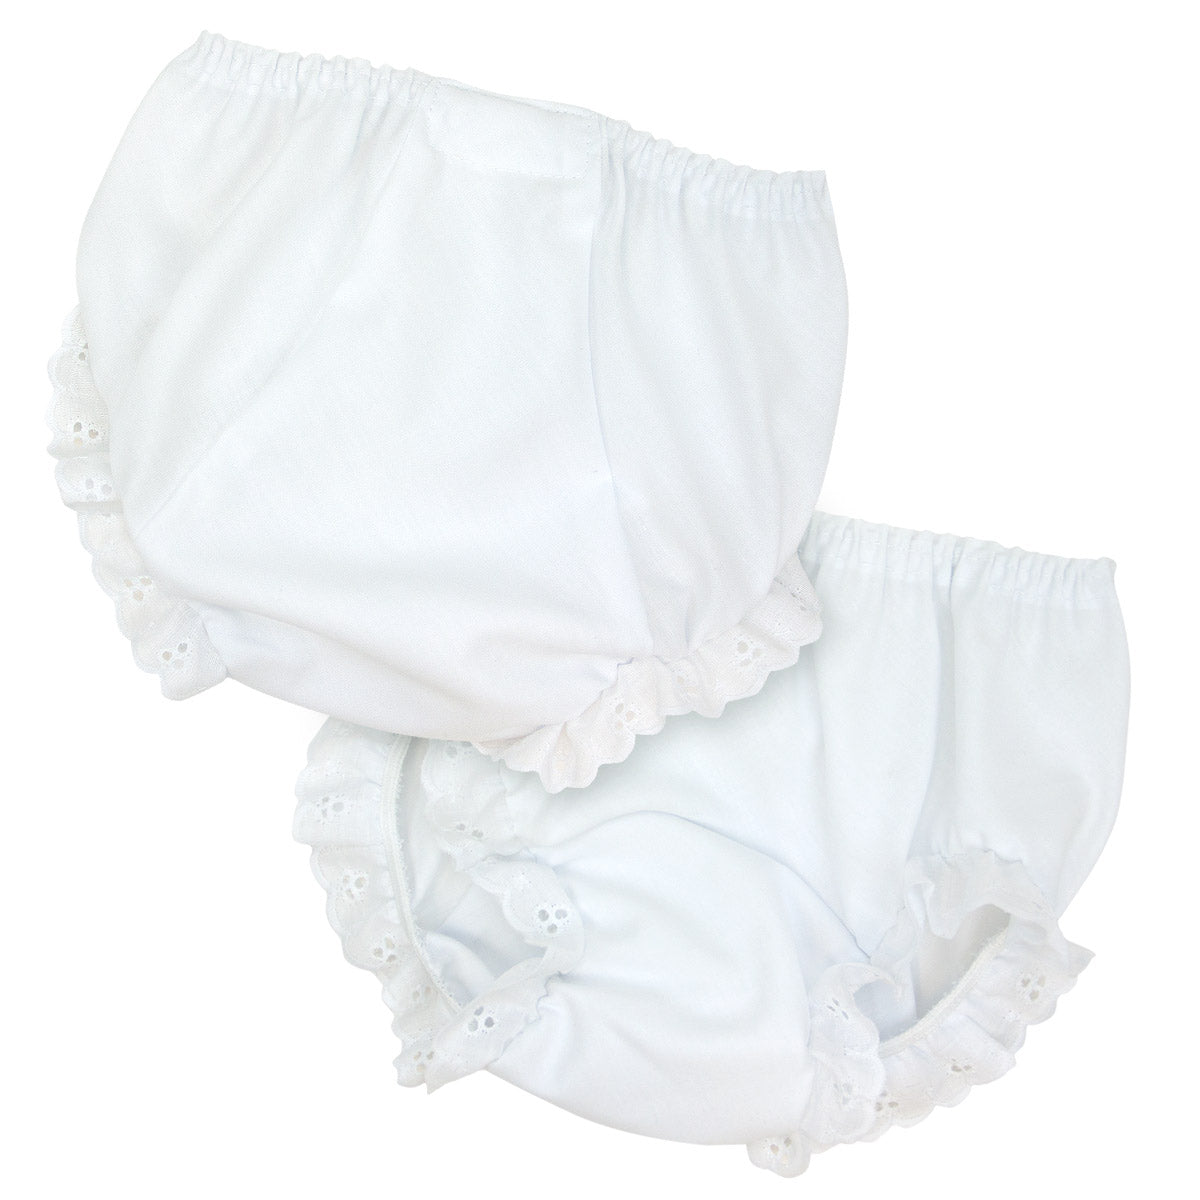 Double Seat White Diaper Cover/Panty